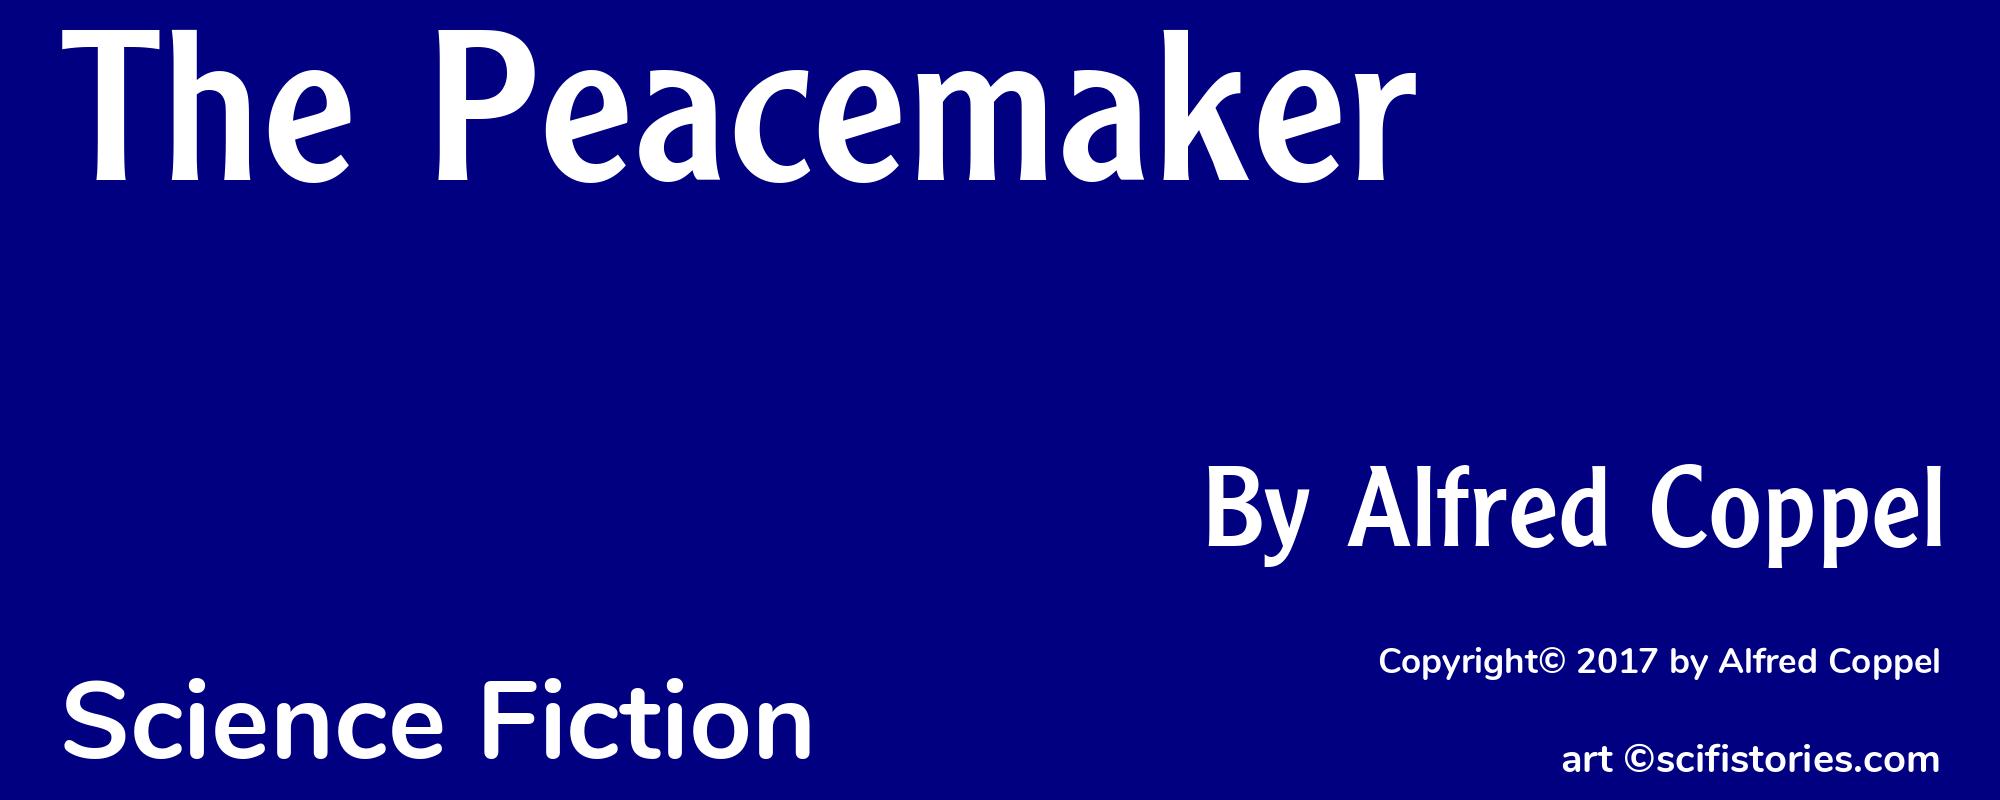 The Peacemaker - Cover